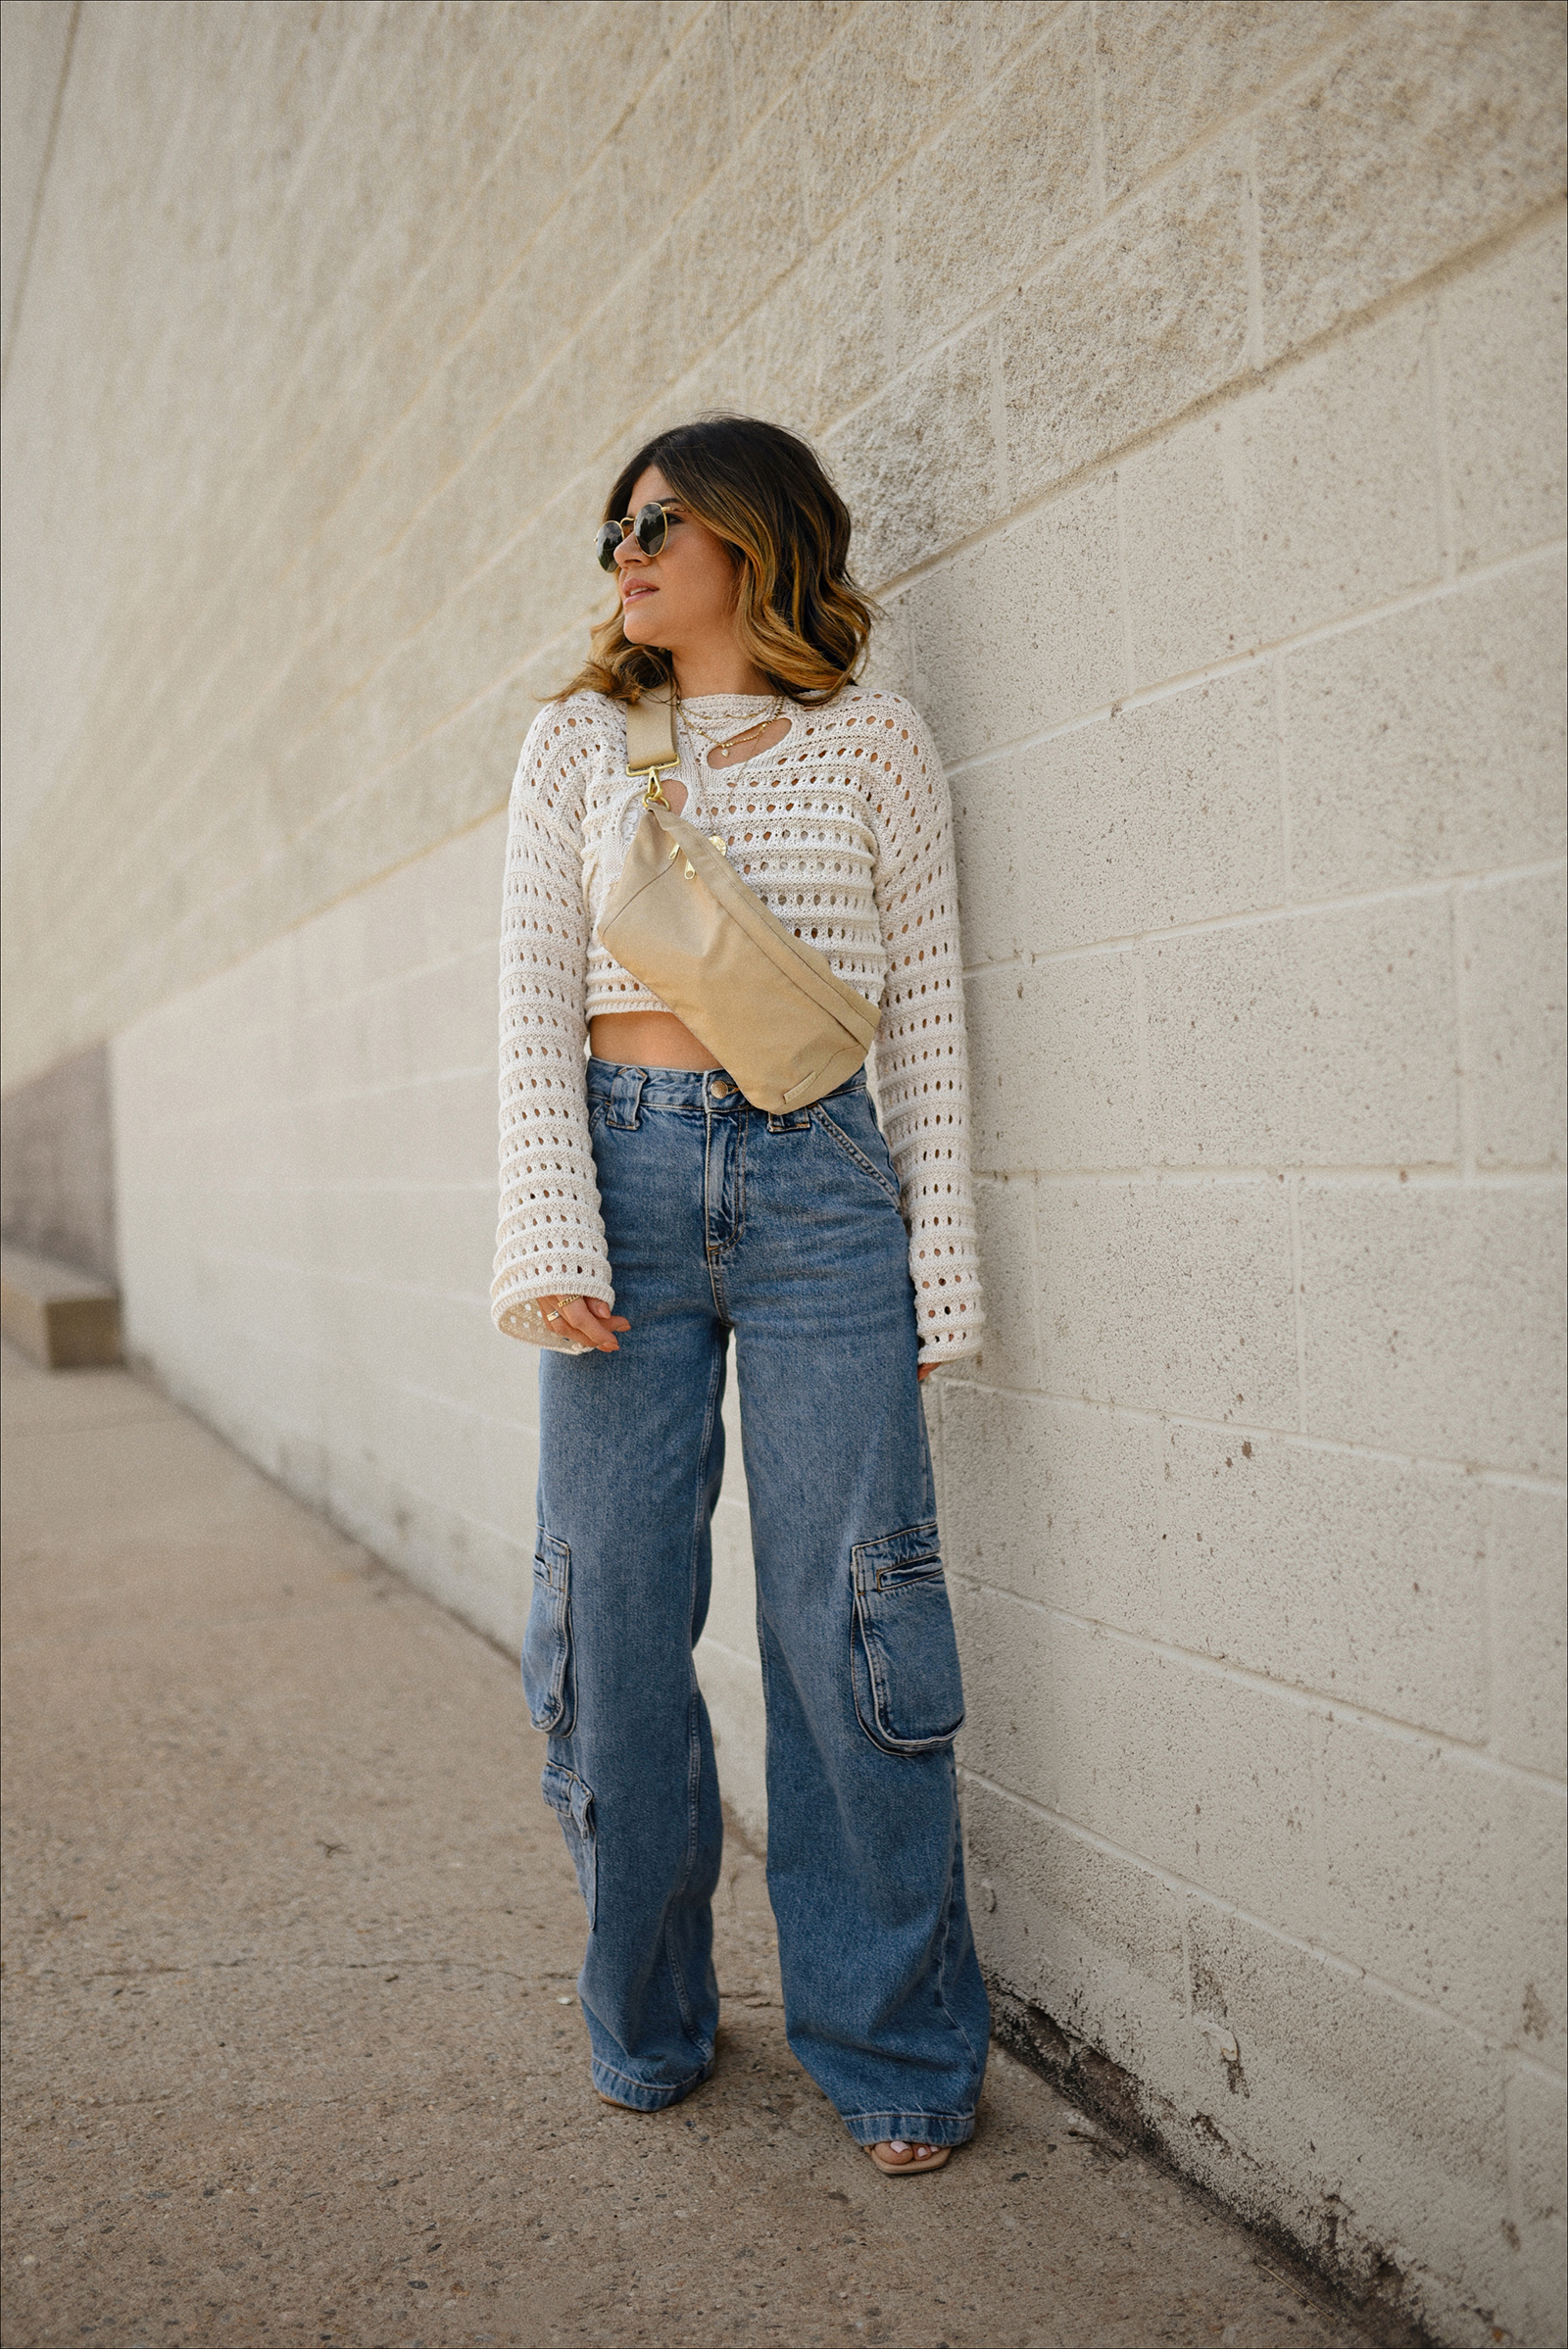 Cargo Jeans for Women: How to Rock this Trendy Style - Posh in